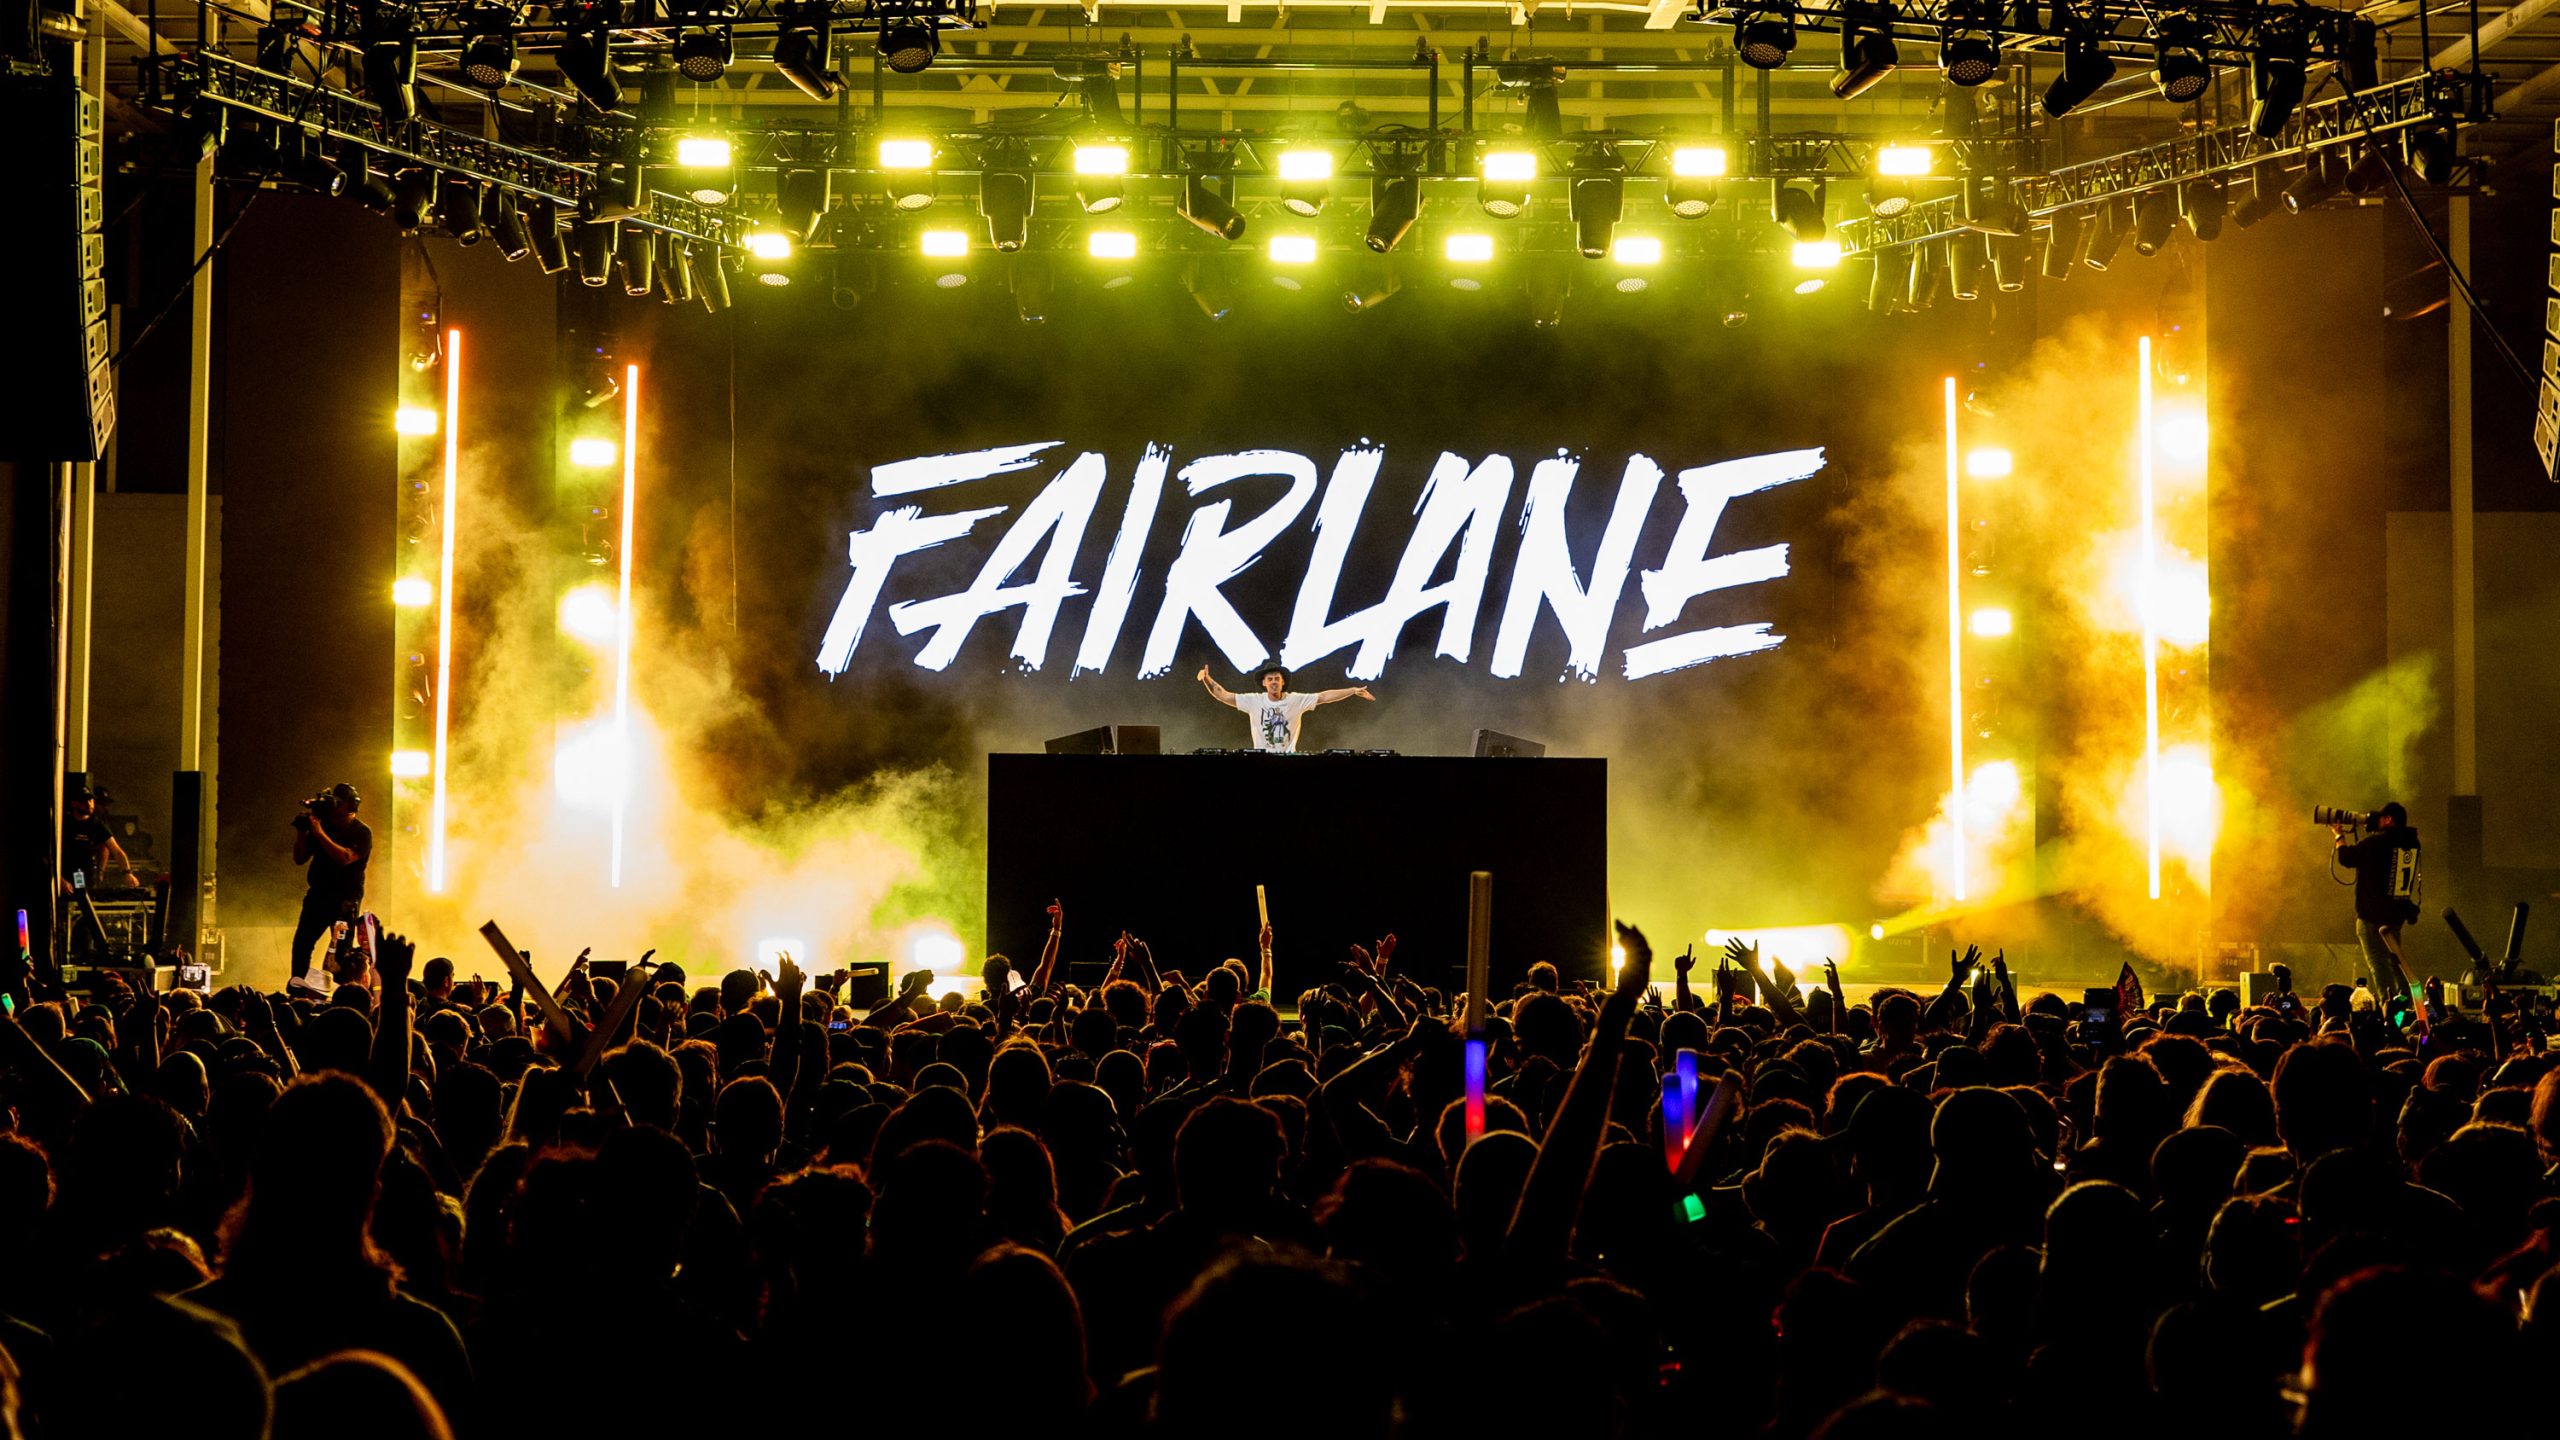 Fairlane at Billboard Presents The Stage – Photo by Travis P. Ball